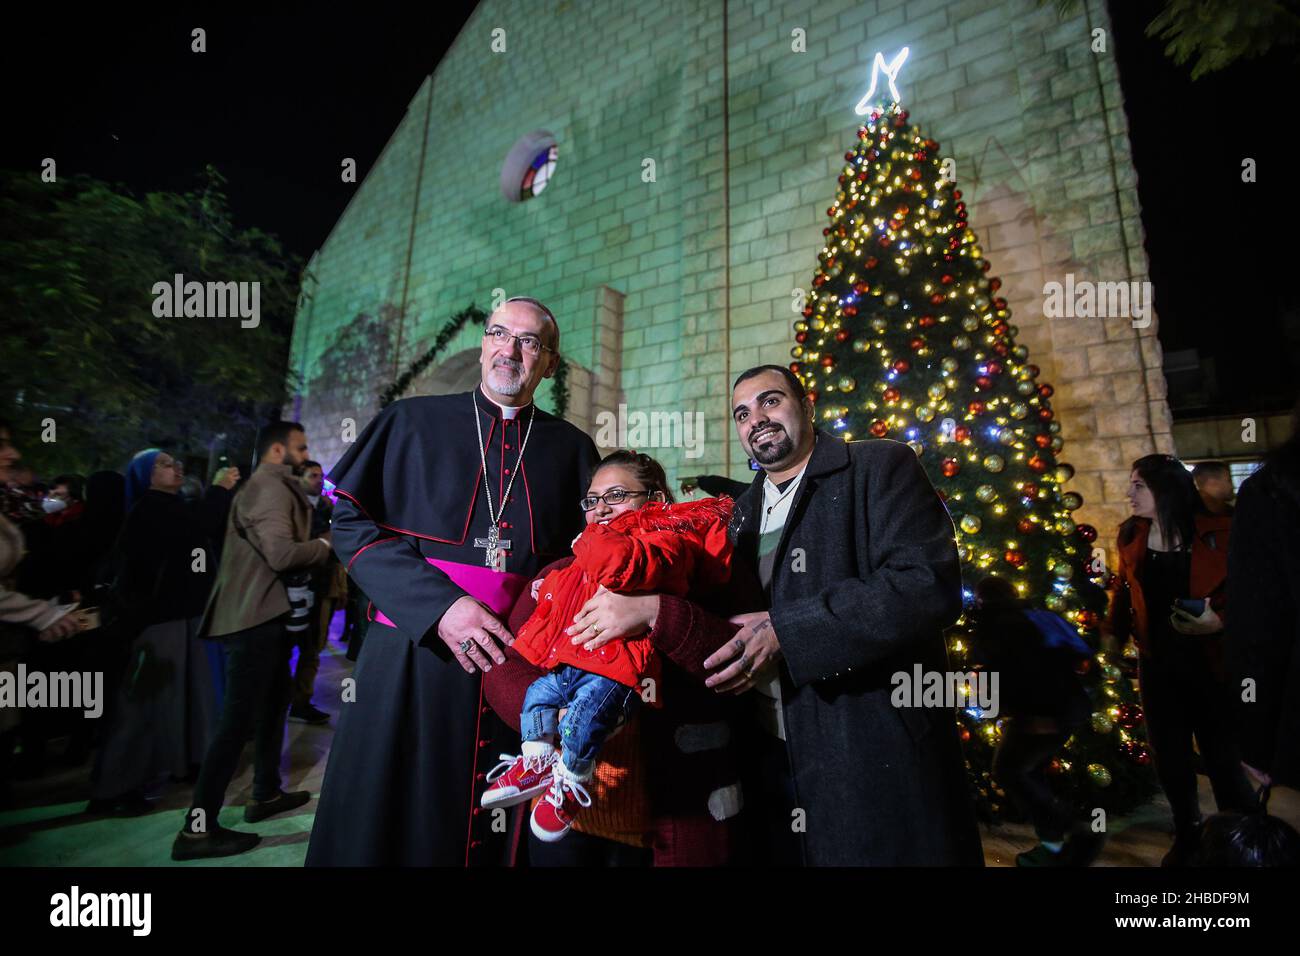 Palestinian Christian worshipers in the Roman Catholic Holy Family Church during the start of the Christmas holiday, in Gaza City, on Dec 18, 2021. Stock Photo